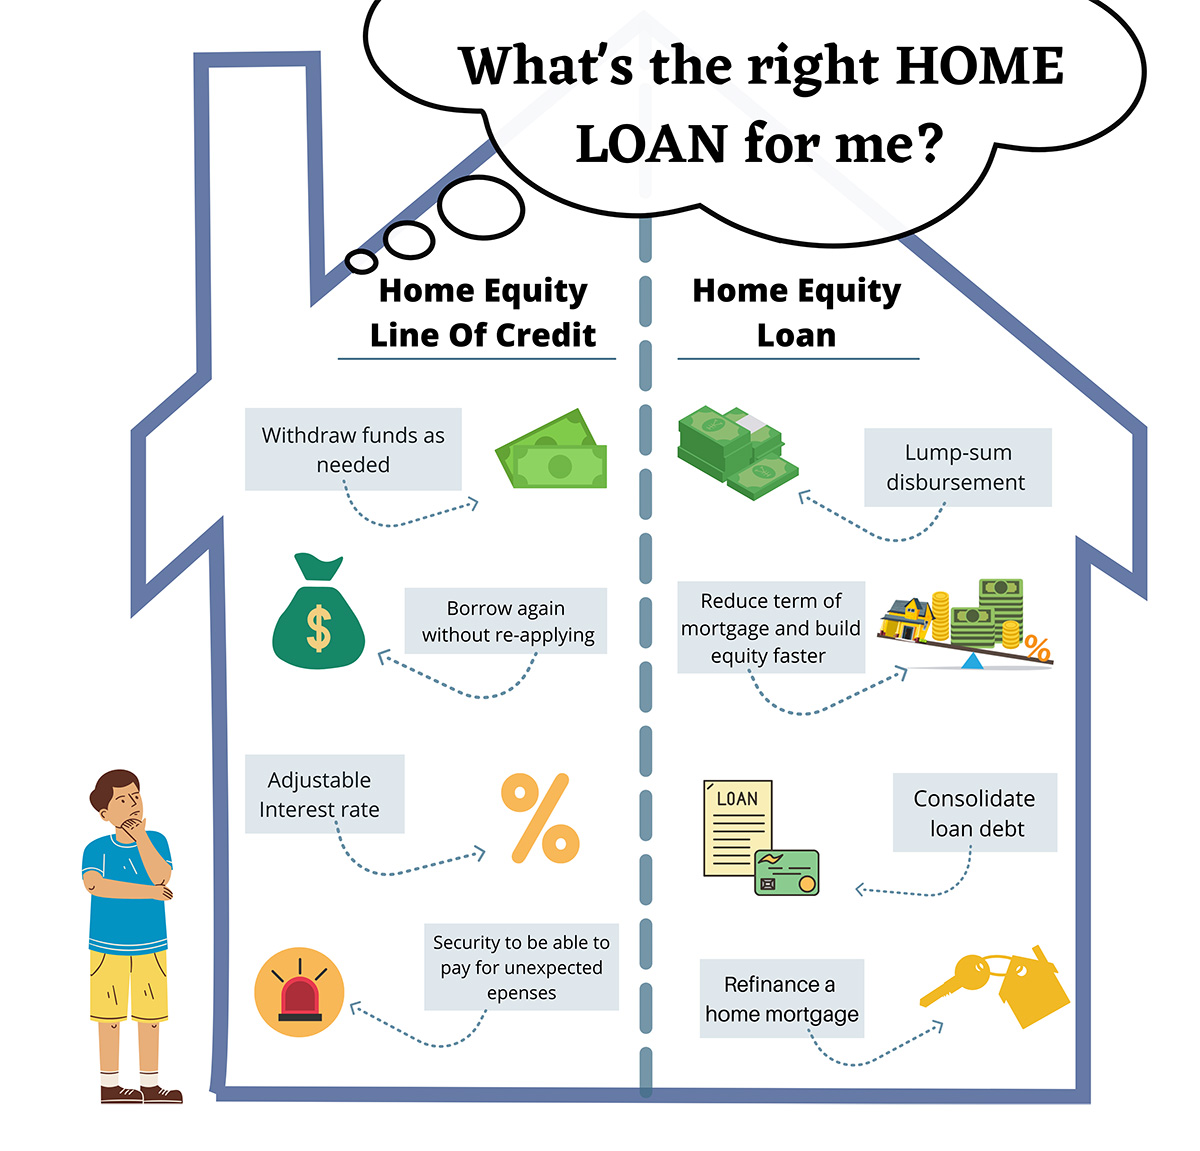 What's the rigth HOME LOAN for me?